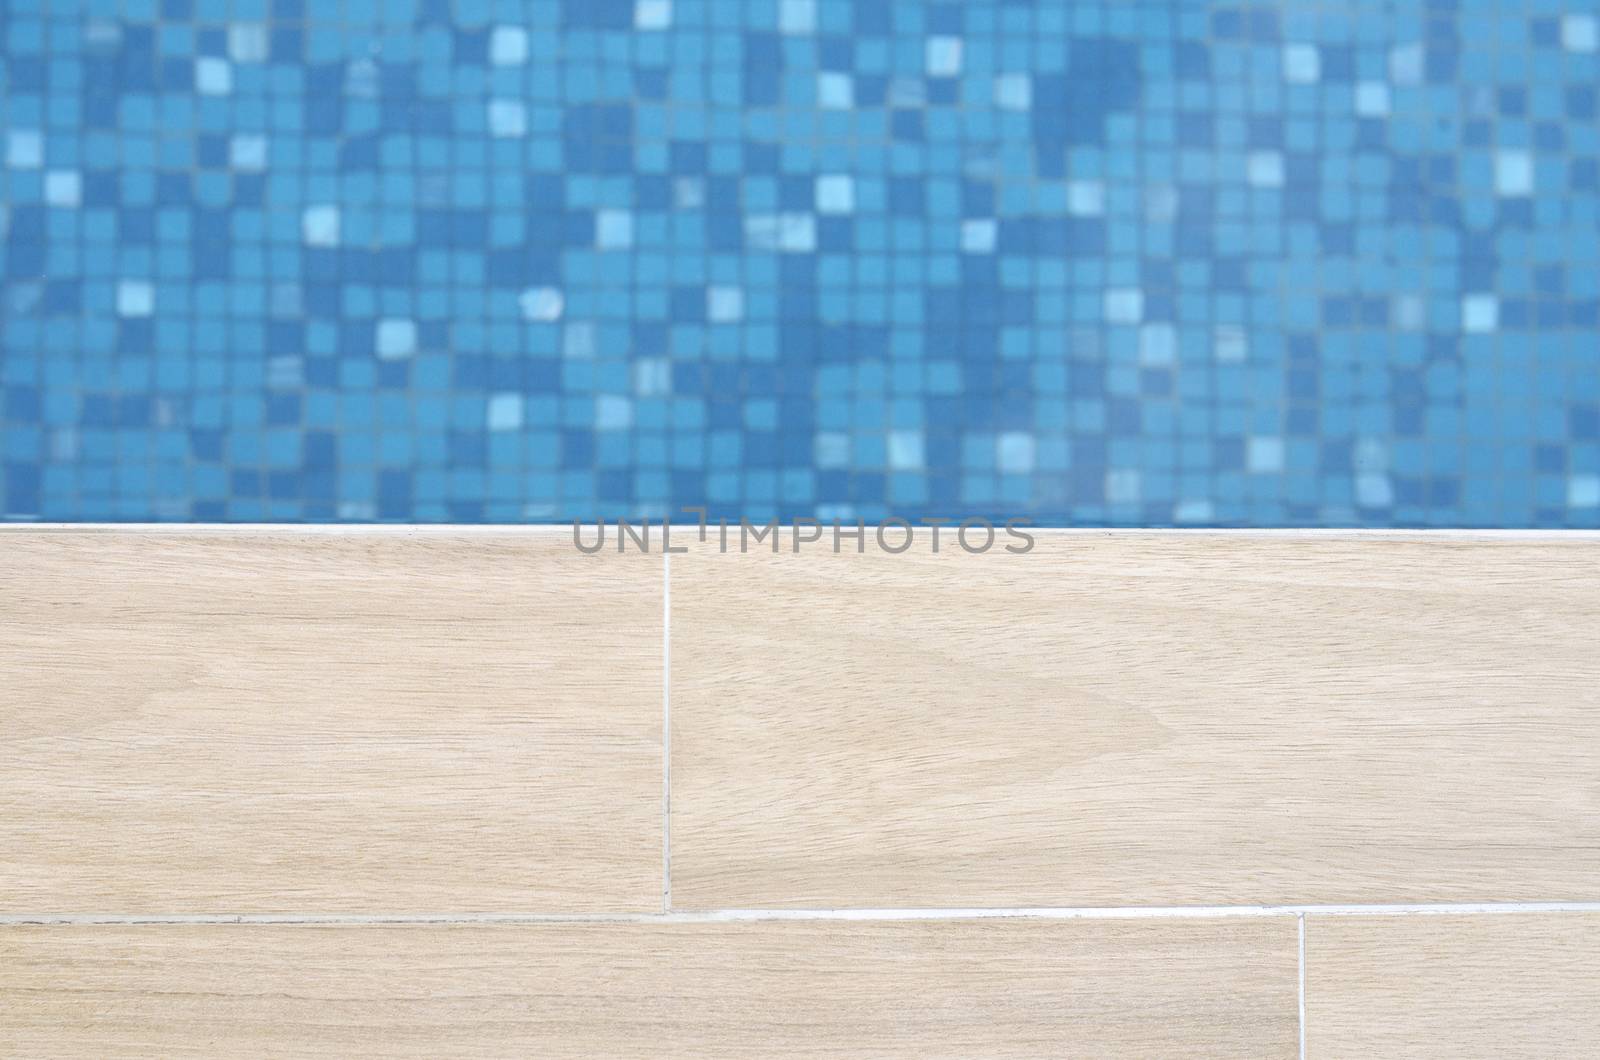 Close focus of edge of artificial wood floor near swimming pool with moving blue water